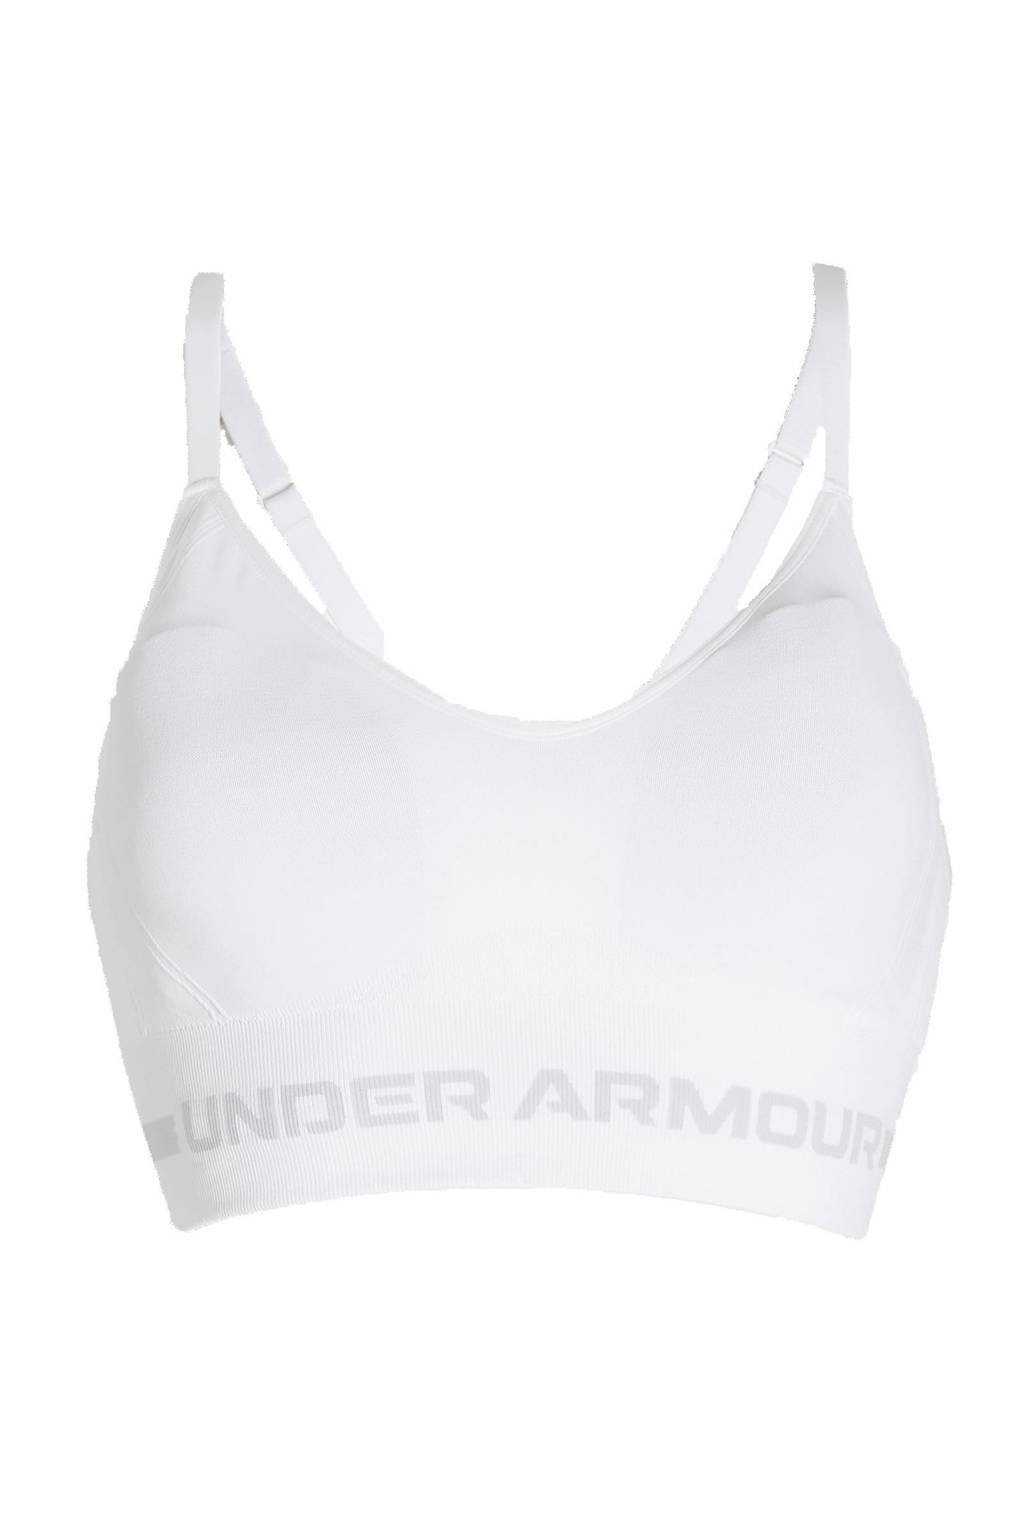 Under Armour level 1 sportbh wit